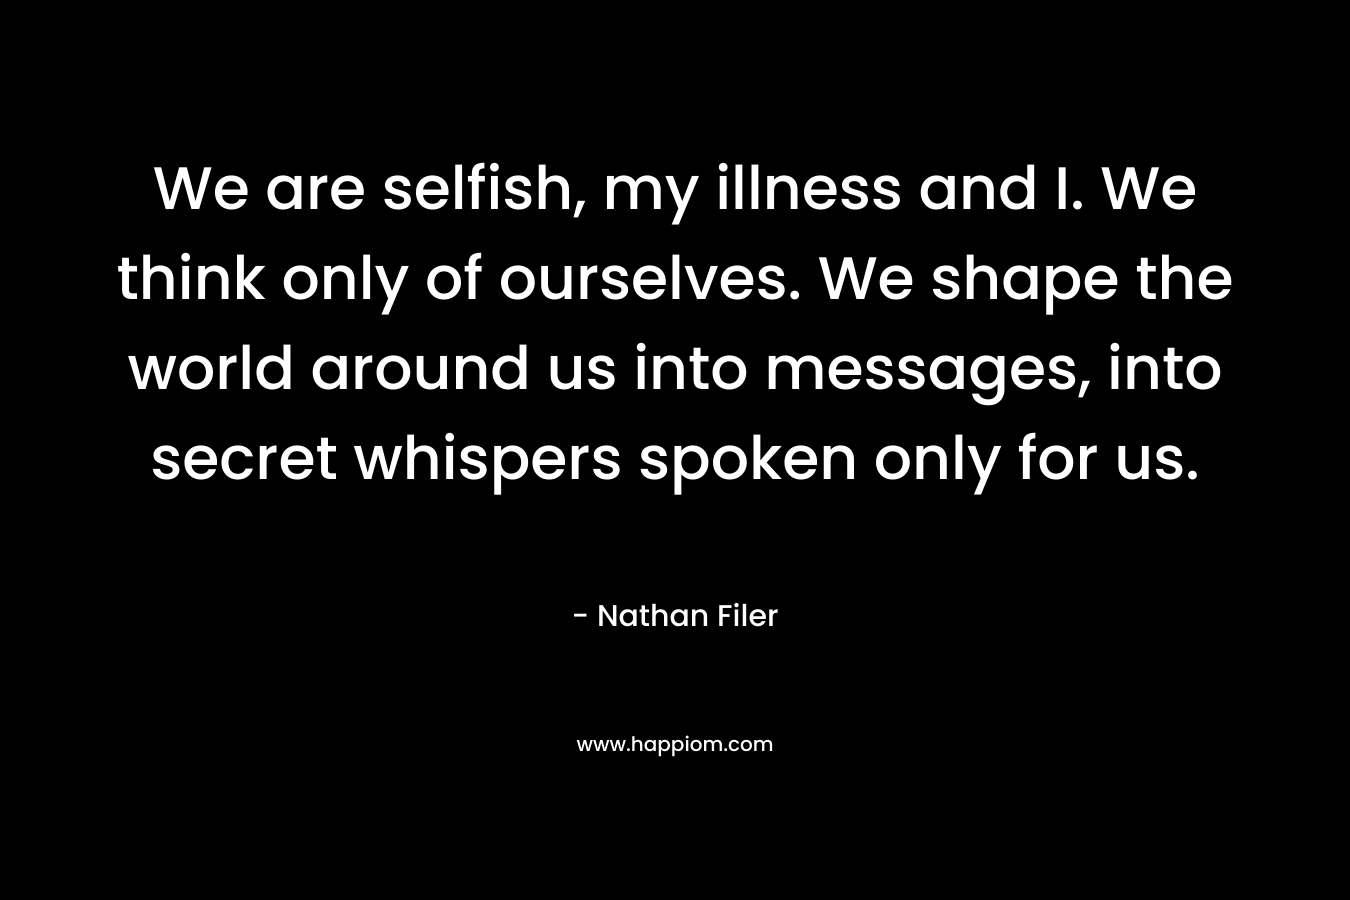 We are selfish, my illness and I. We think only of ourselves. We shape the world around us into messages, into secret whispers spoken only for us. – Nathan Filer